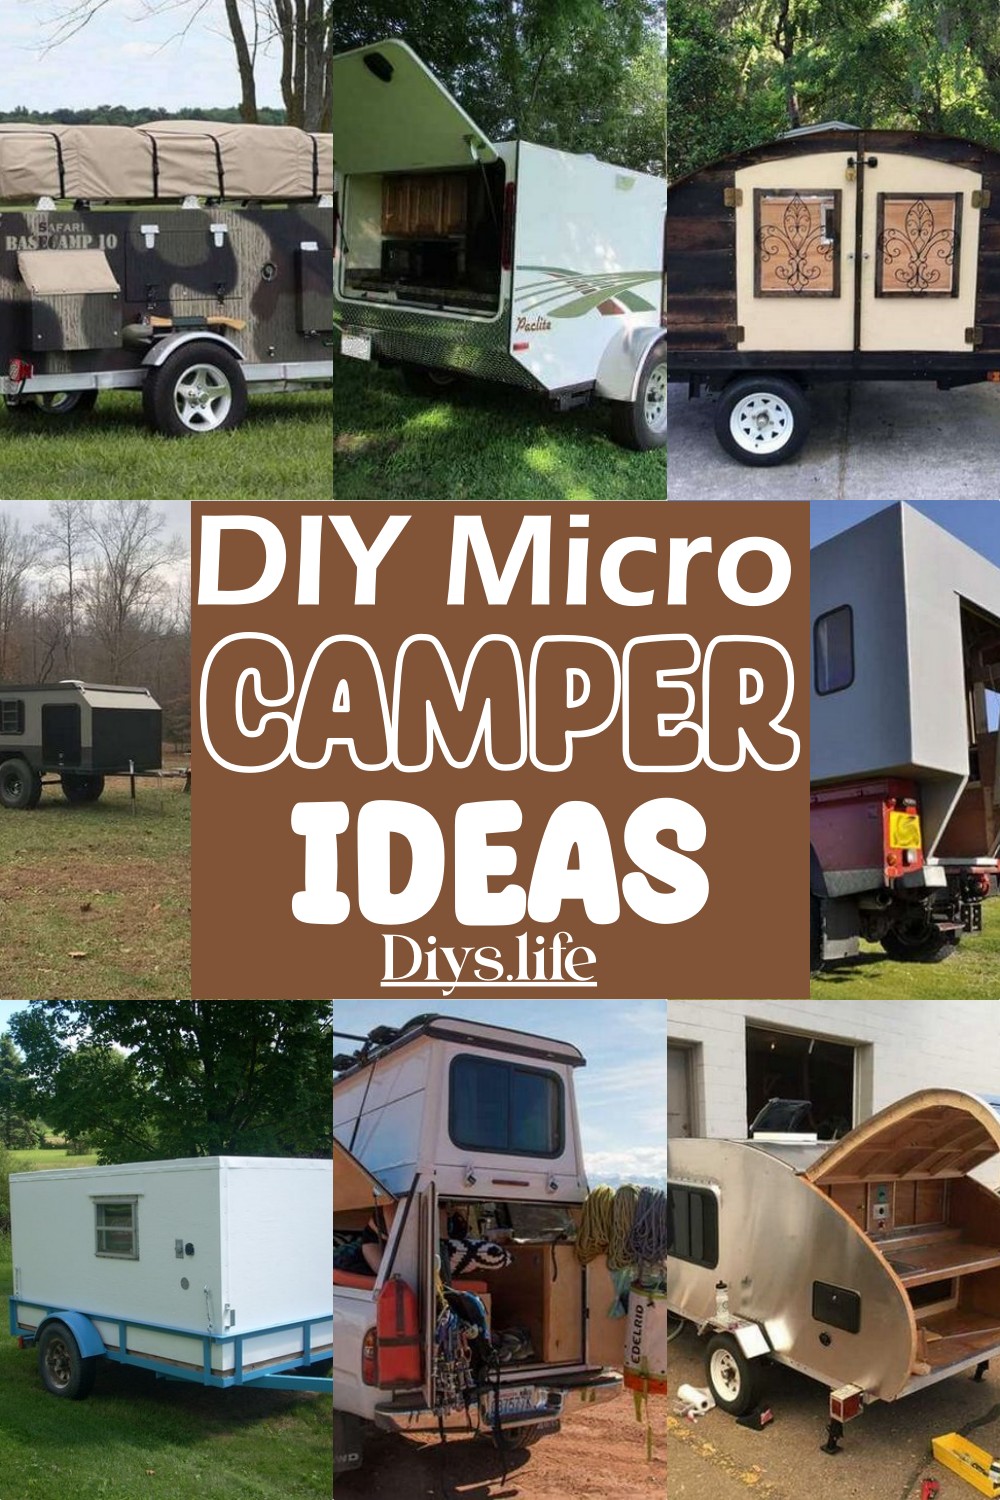 DIY Micro Camper Ideas for trips 